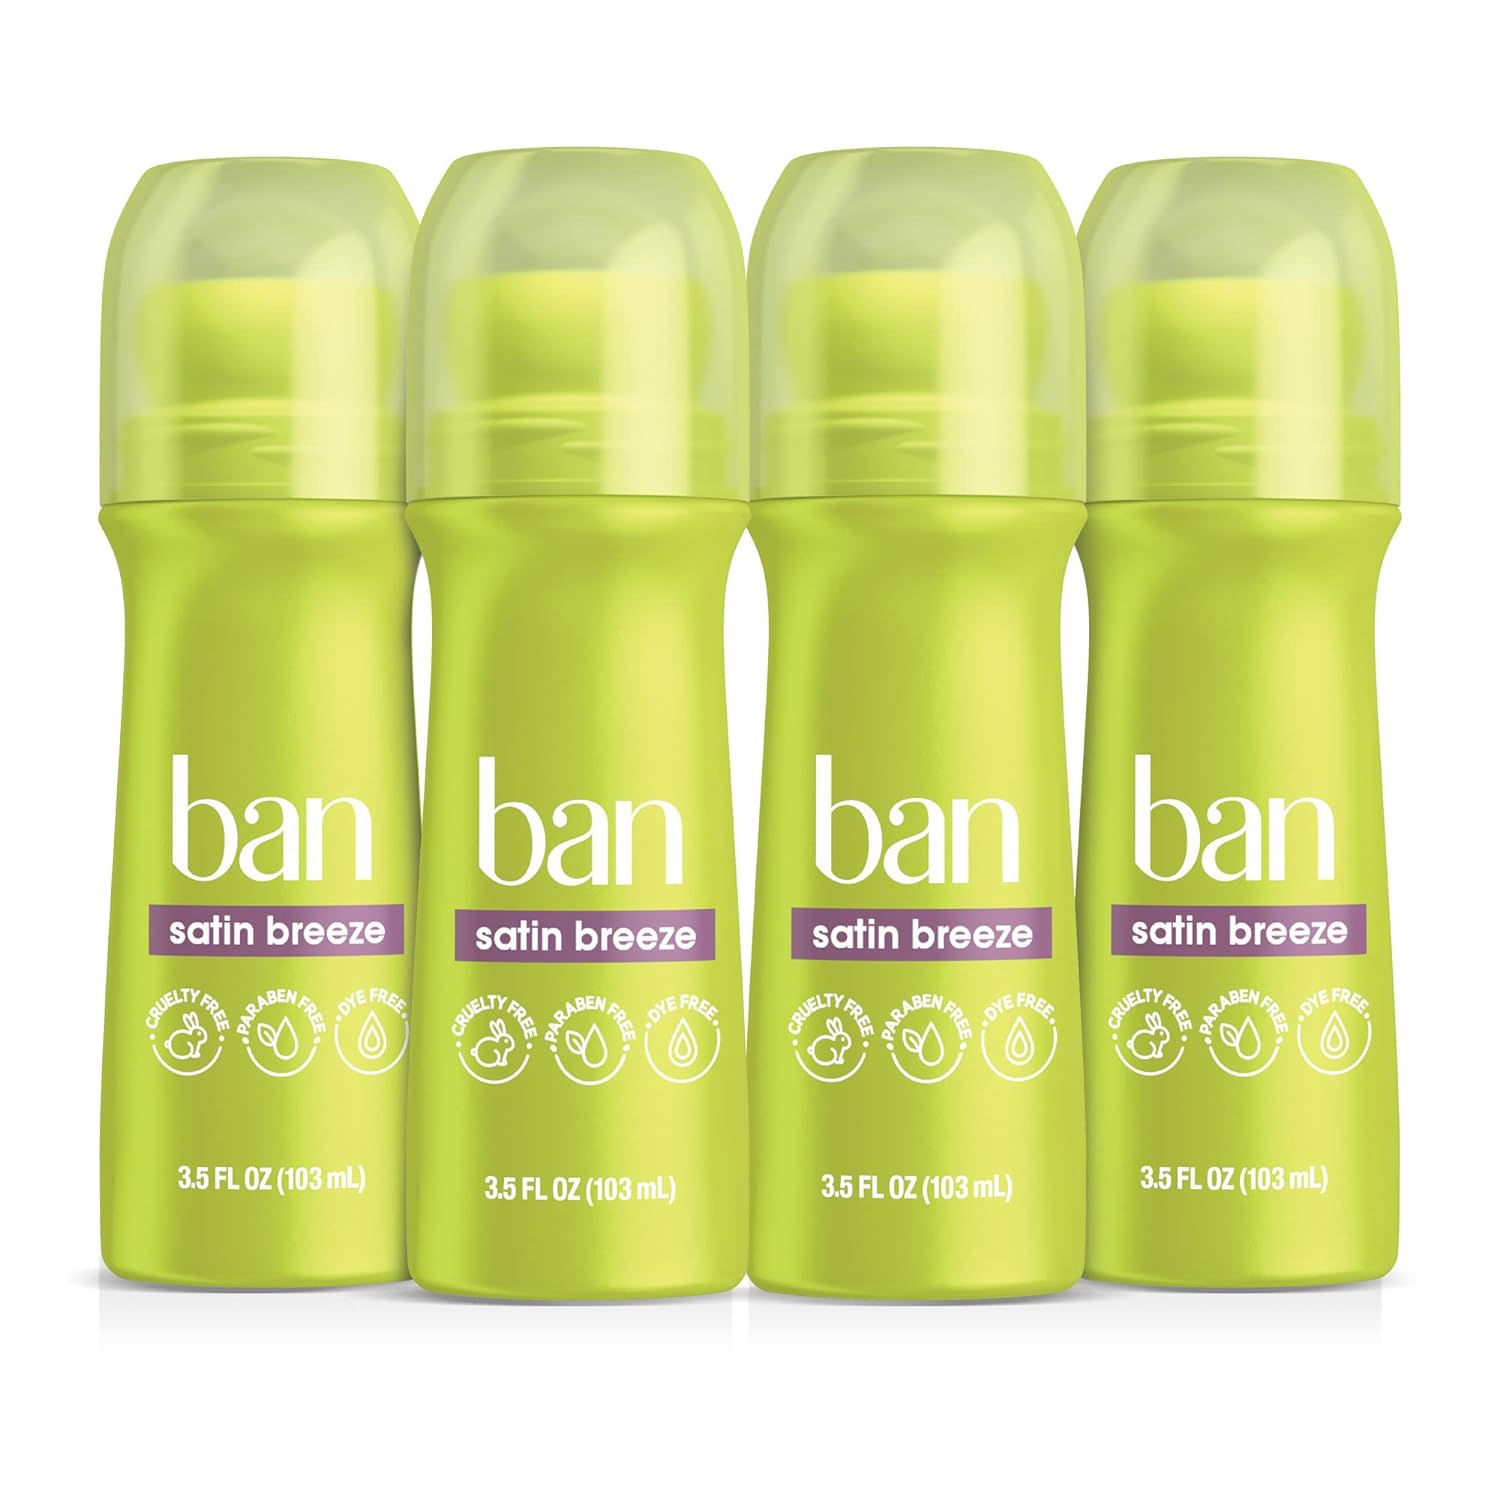 Ban Satin Breeze 24-hour Invisible Antiperspirant, 3.5oz Roll-on Deodorant for Women and Men, 4-pack, Underarm Wetness Protection, with Odor-fighting Ingredients